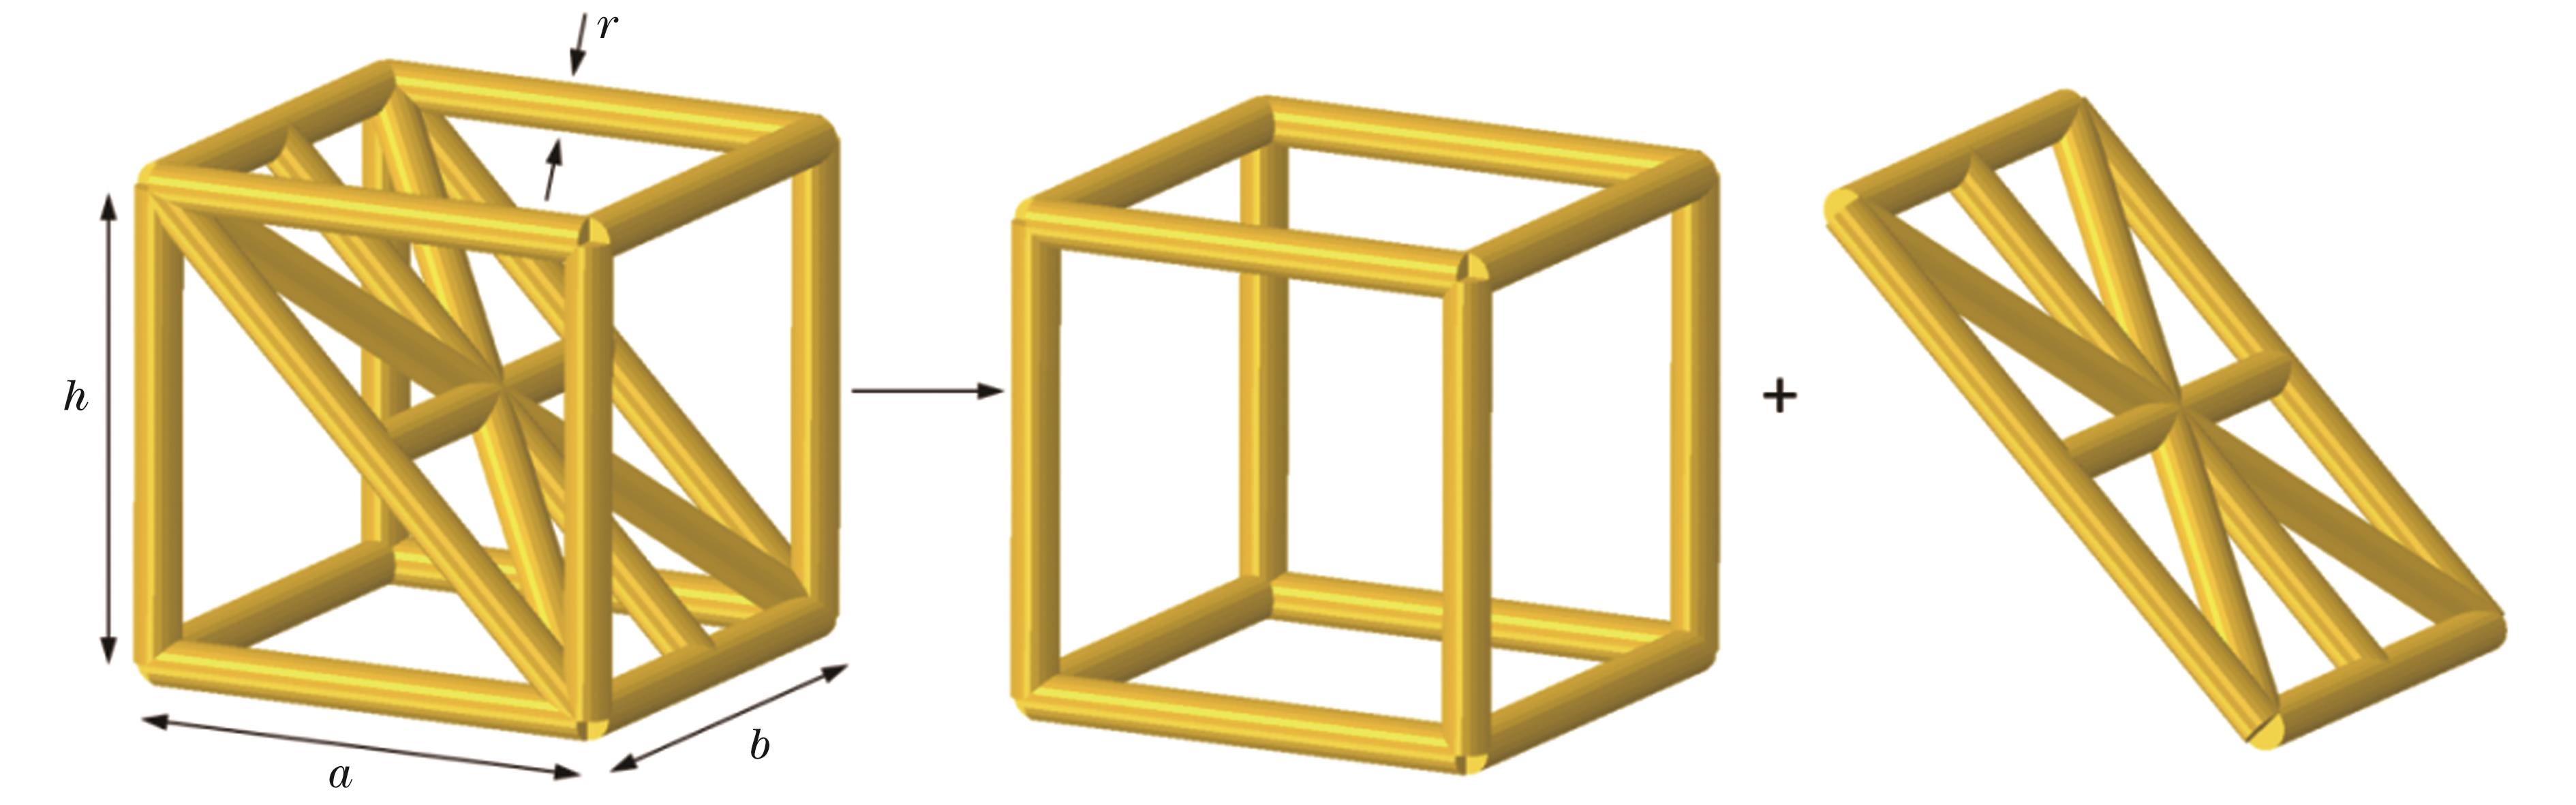 Modeling of a unit-cell of metamaterial